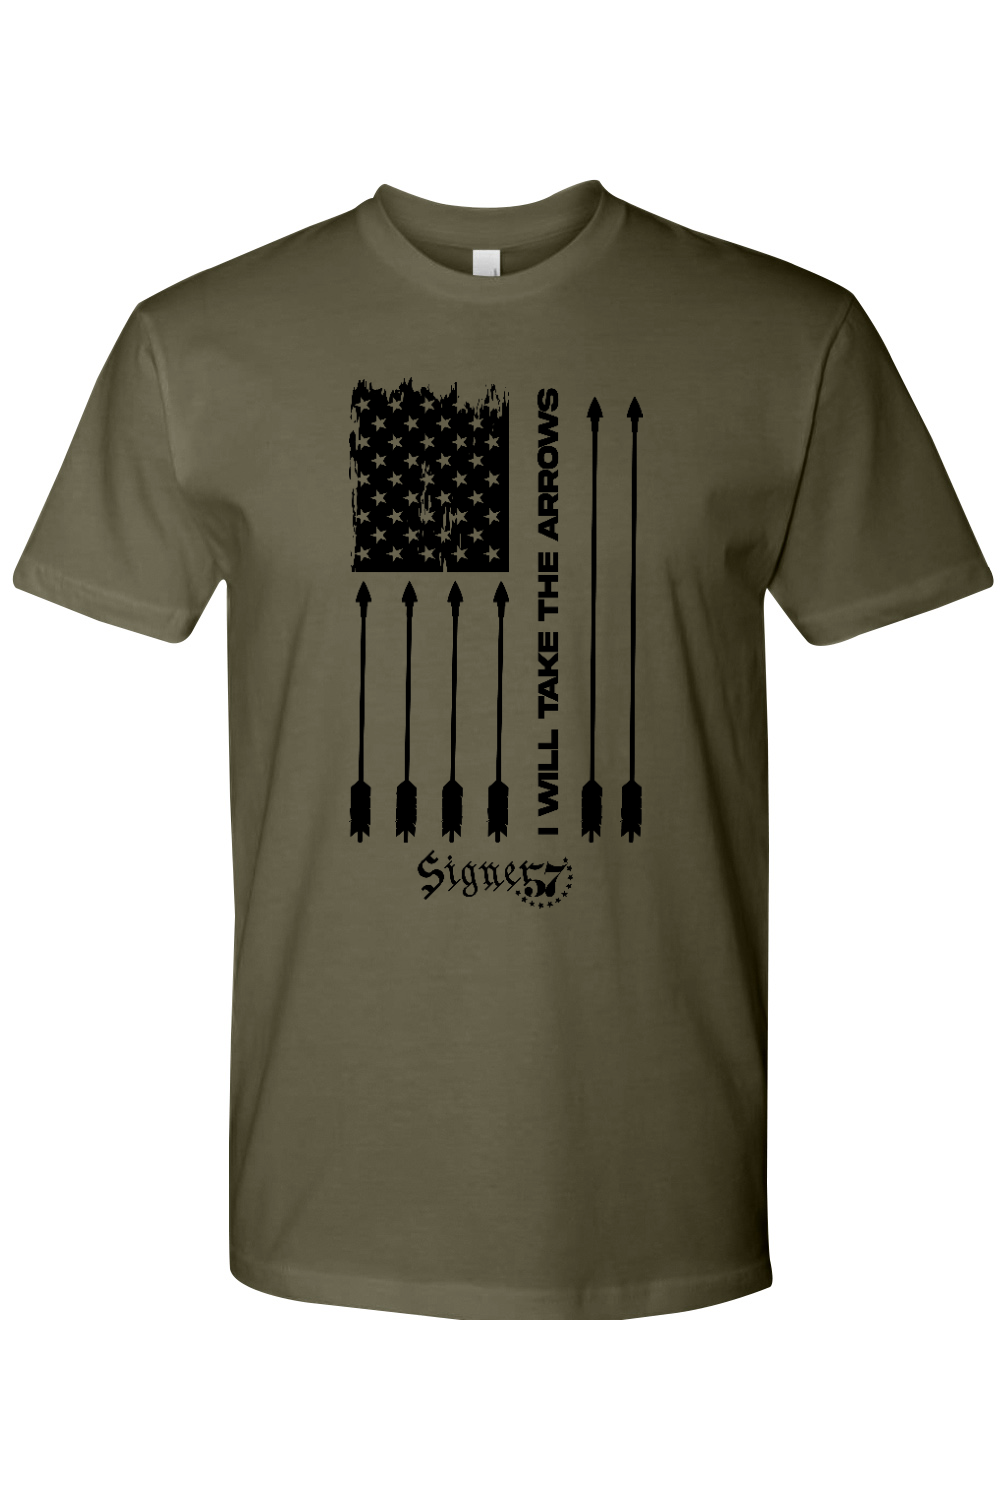 UNISEX T-Shirt - I Will Take the Arrows